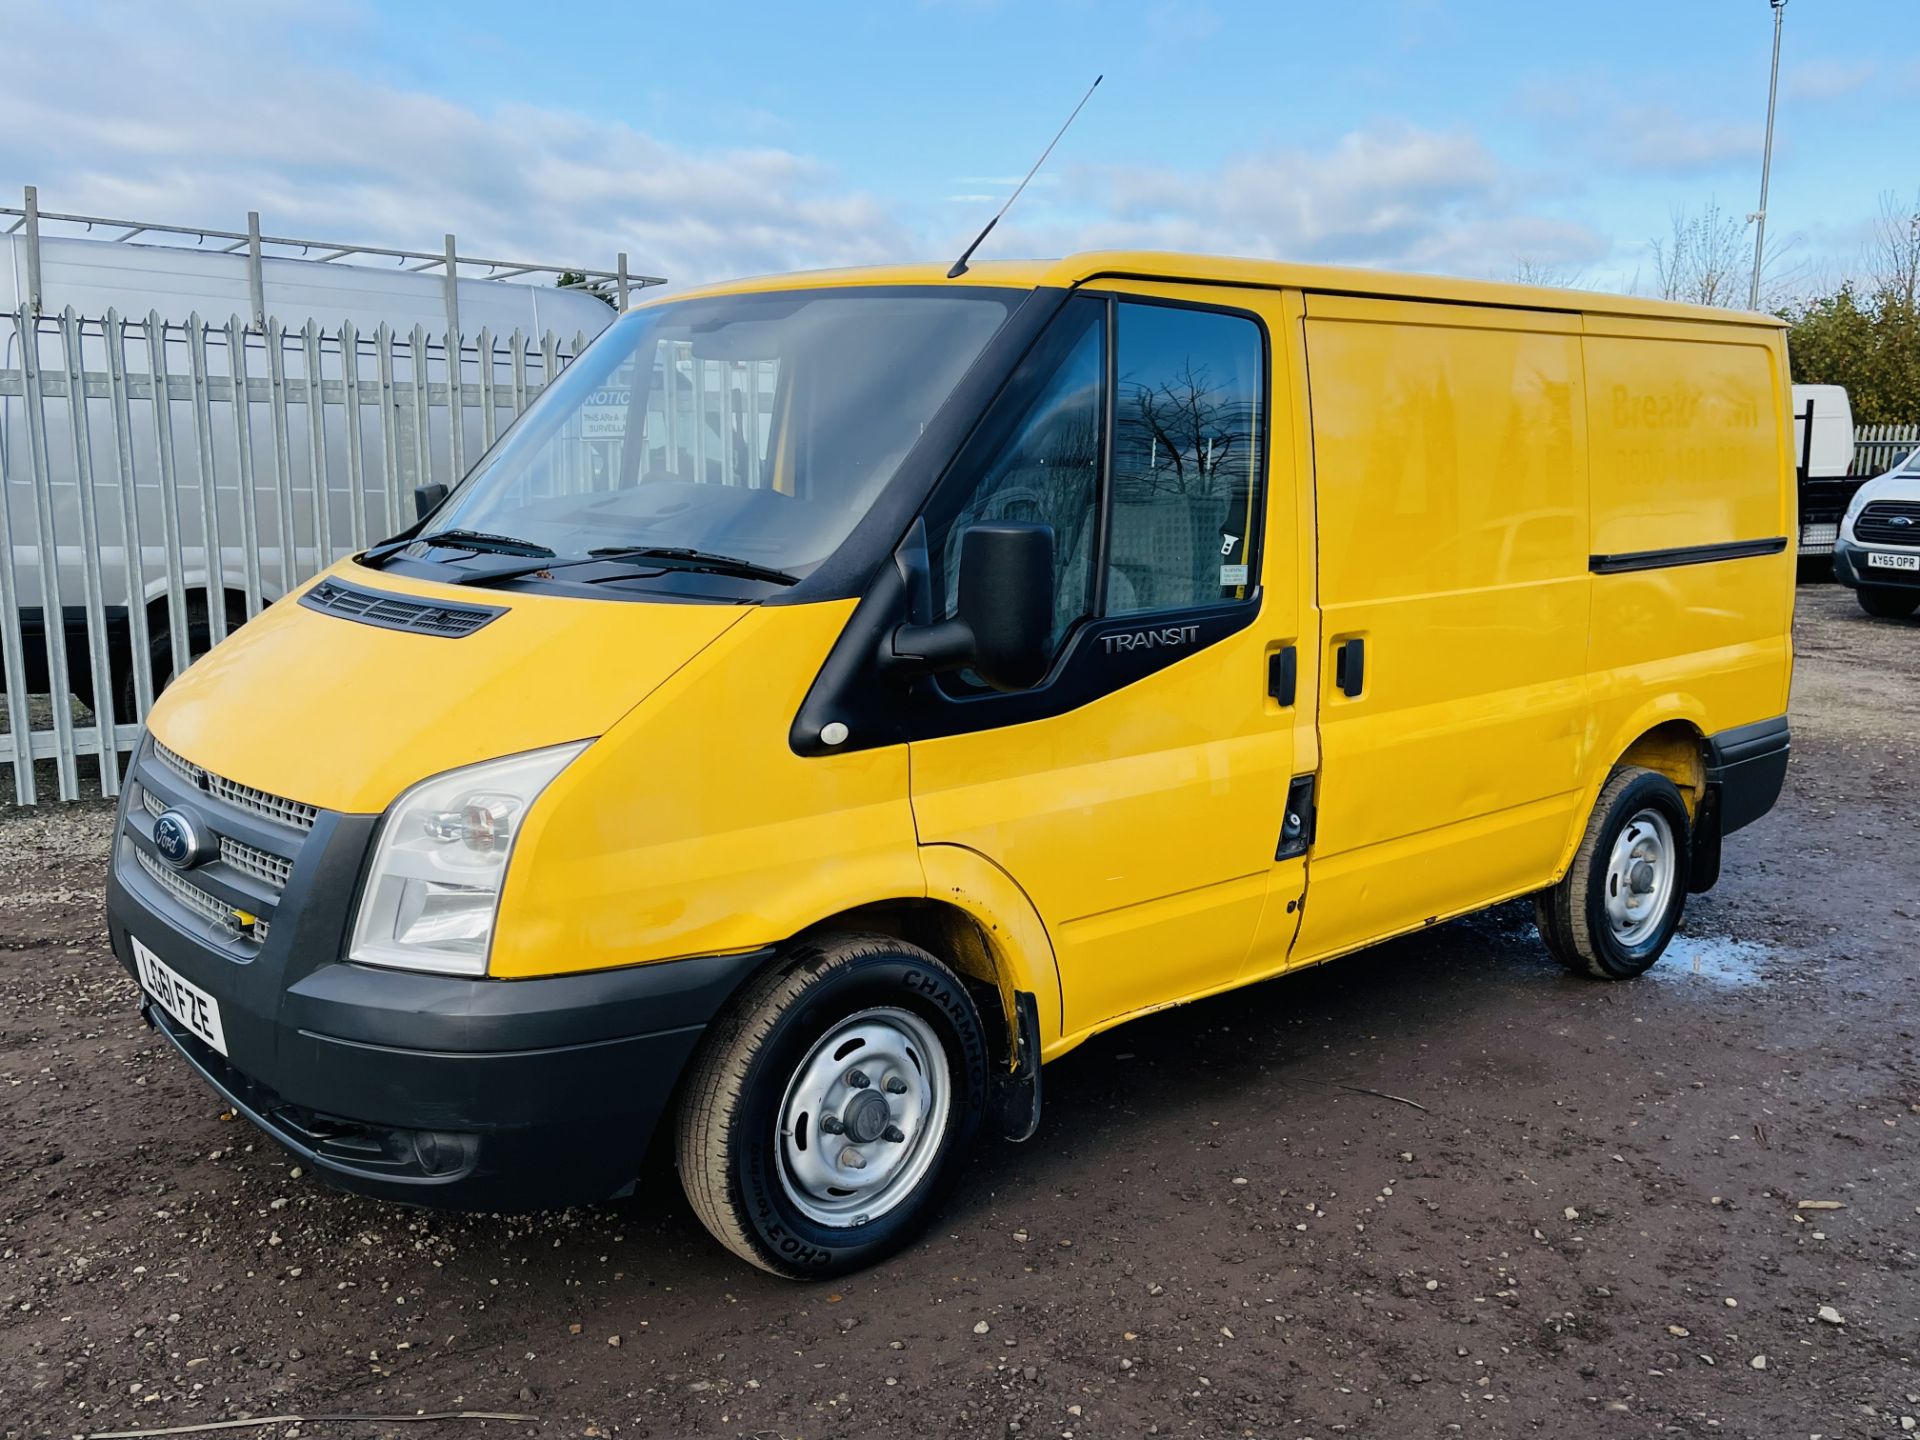 Ford Transit 2.2 TDCI 125 T300 L1 H1 FWD 2011 '61 Reg' Air Con - Elec Pack - No Vat Save 20% - Image 5 of 19